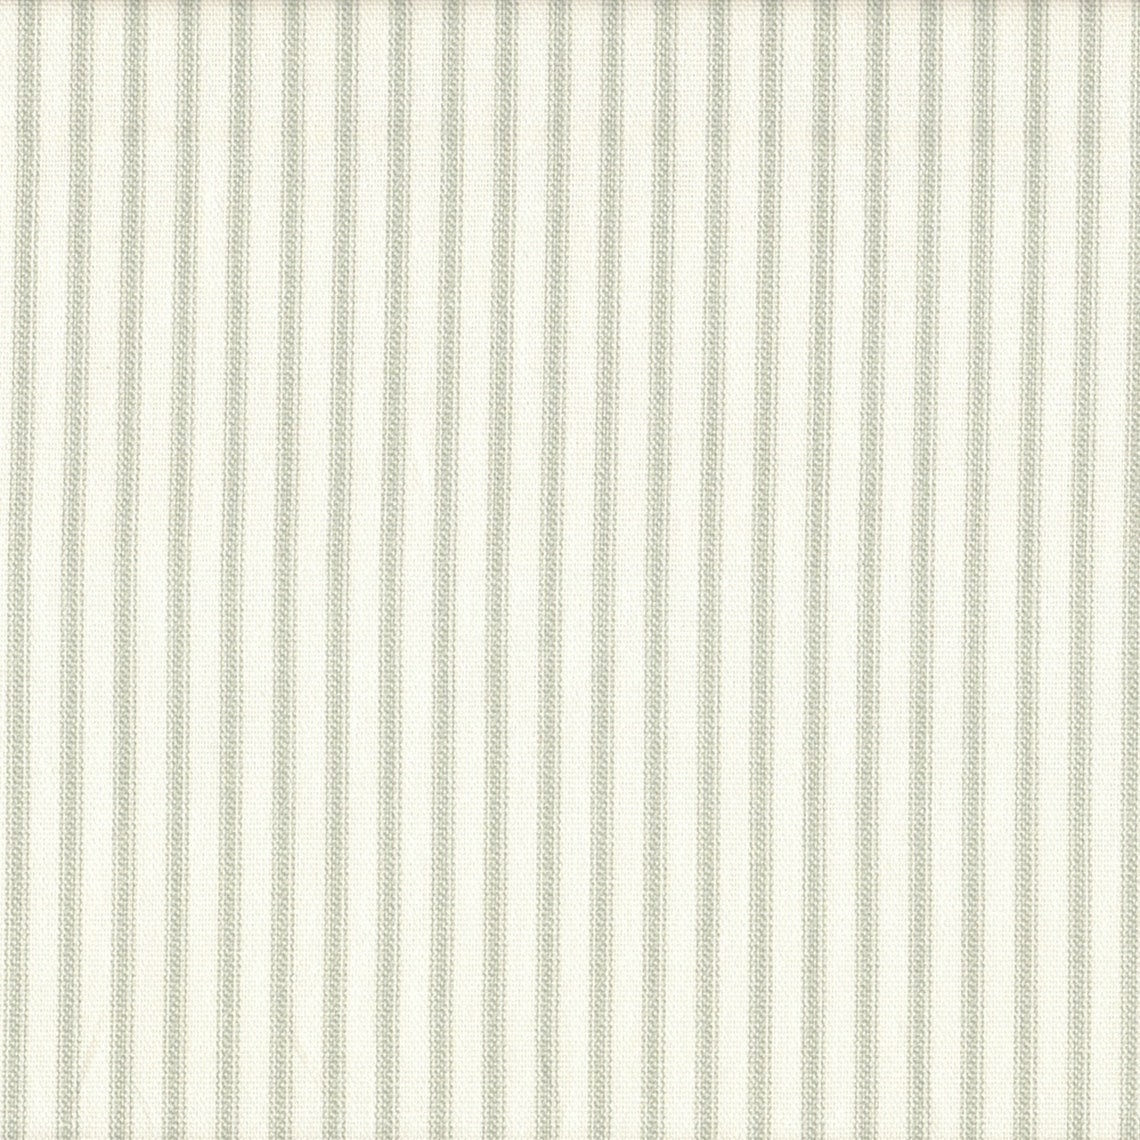 tailored valance in farmhouse pale sage green ticking stripe on cream